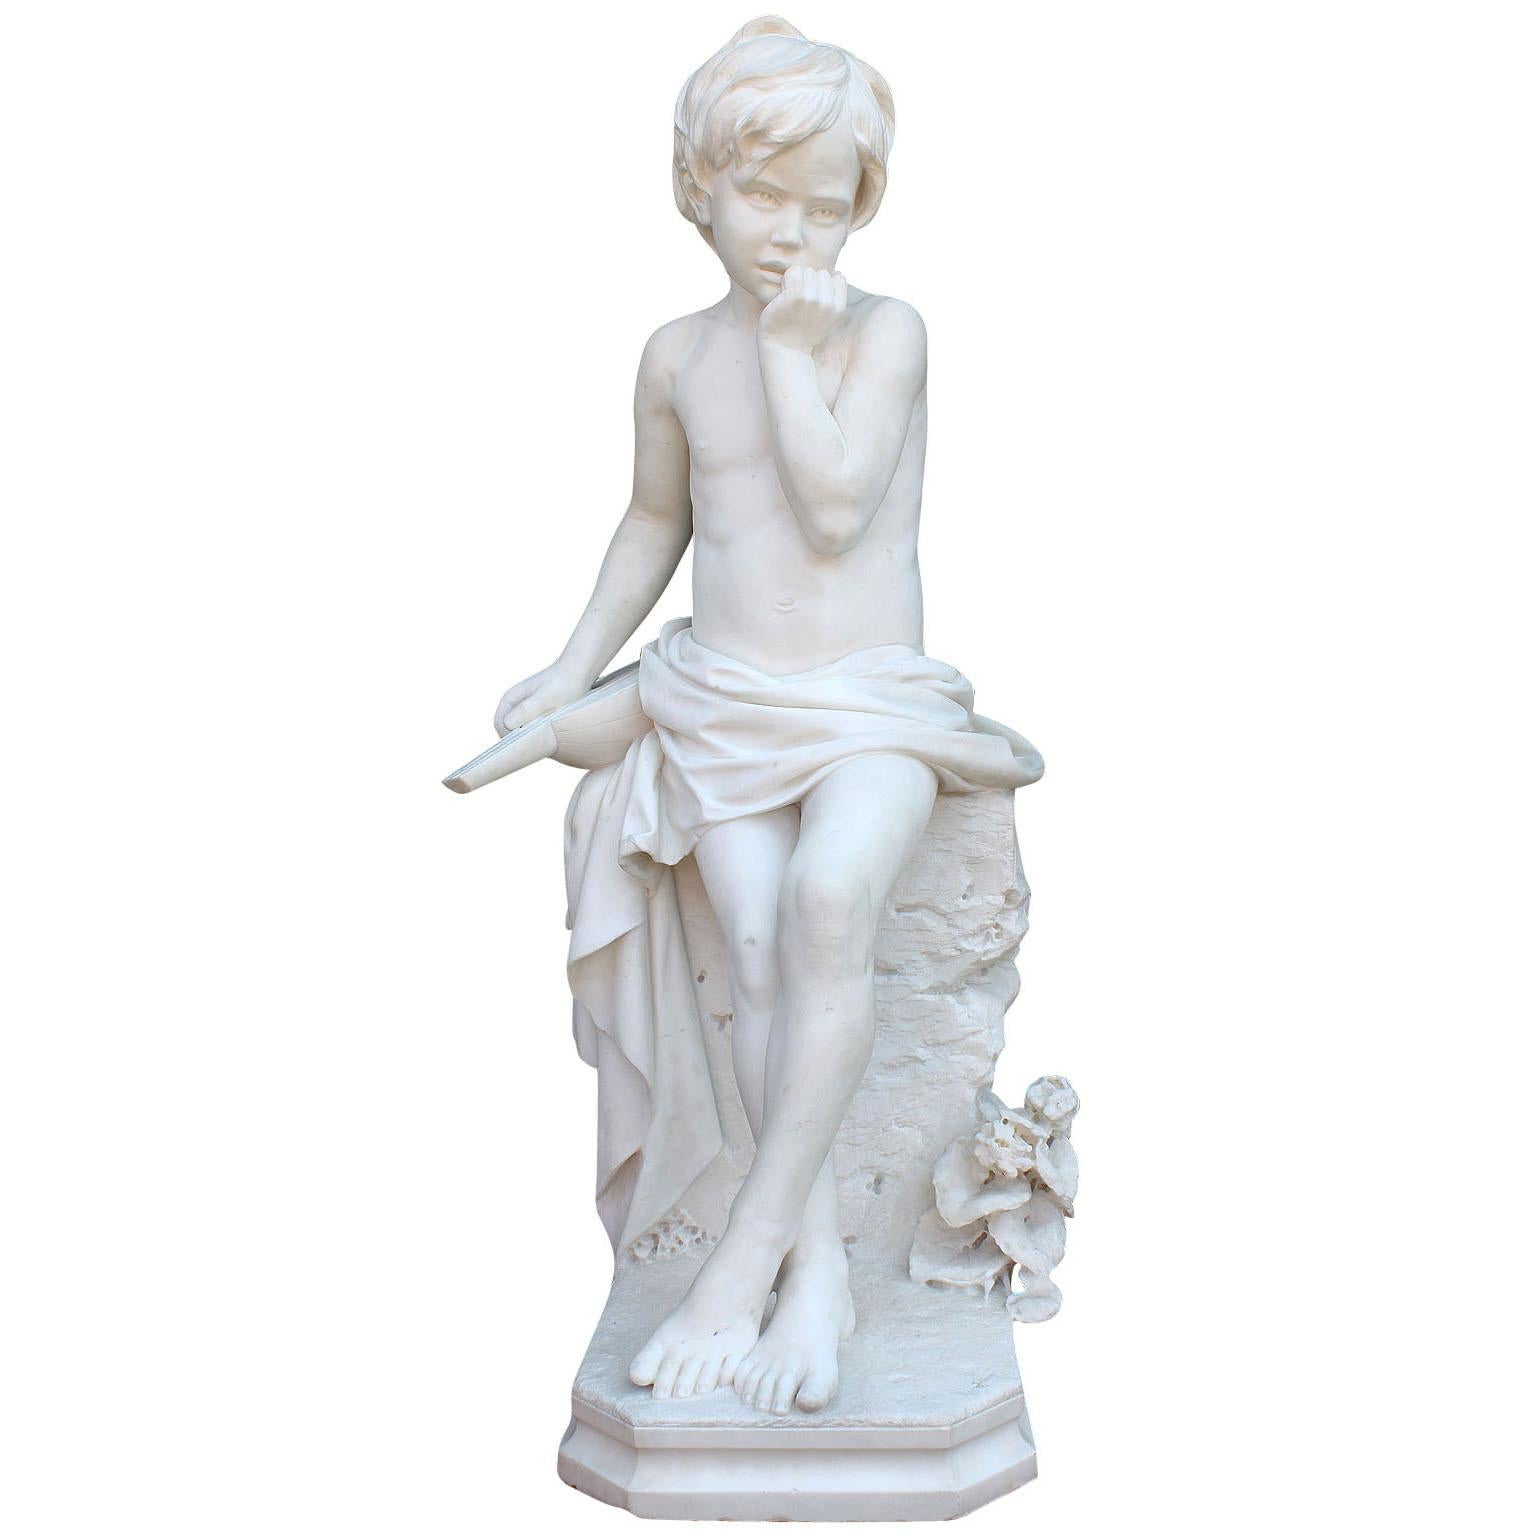 Italian 19th Century Carved Carrara Marble Figure of a Young Boy with a Mandolin